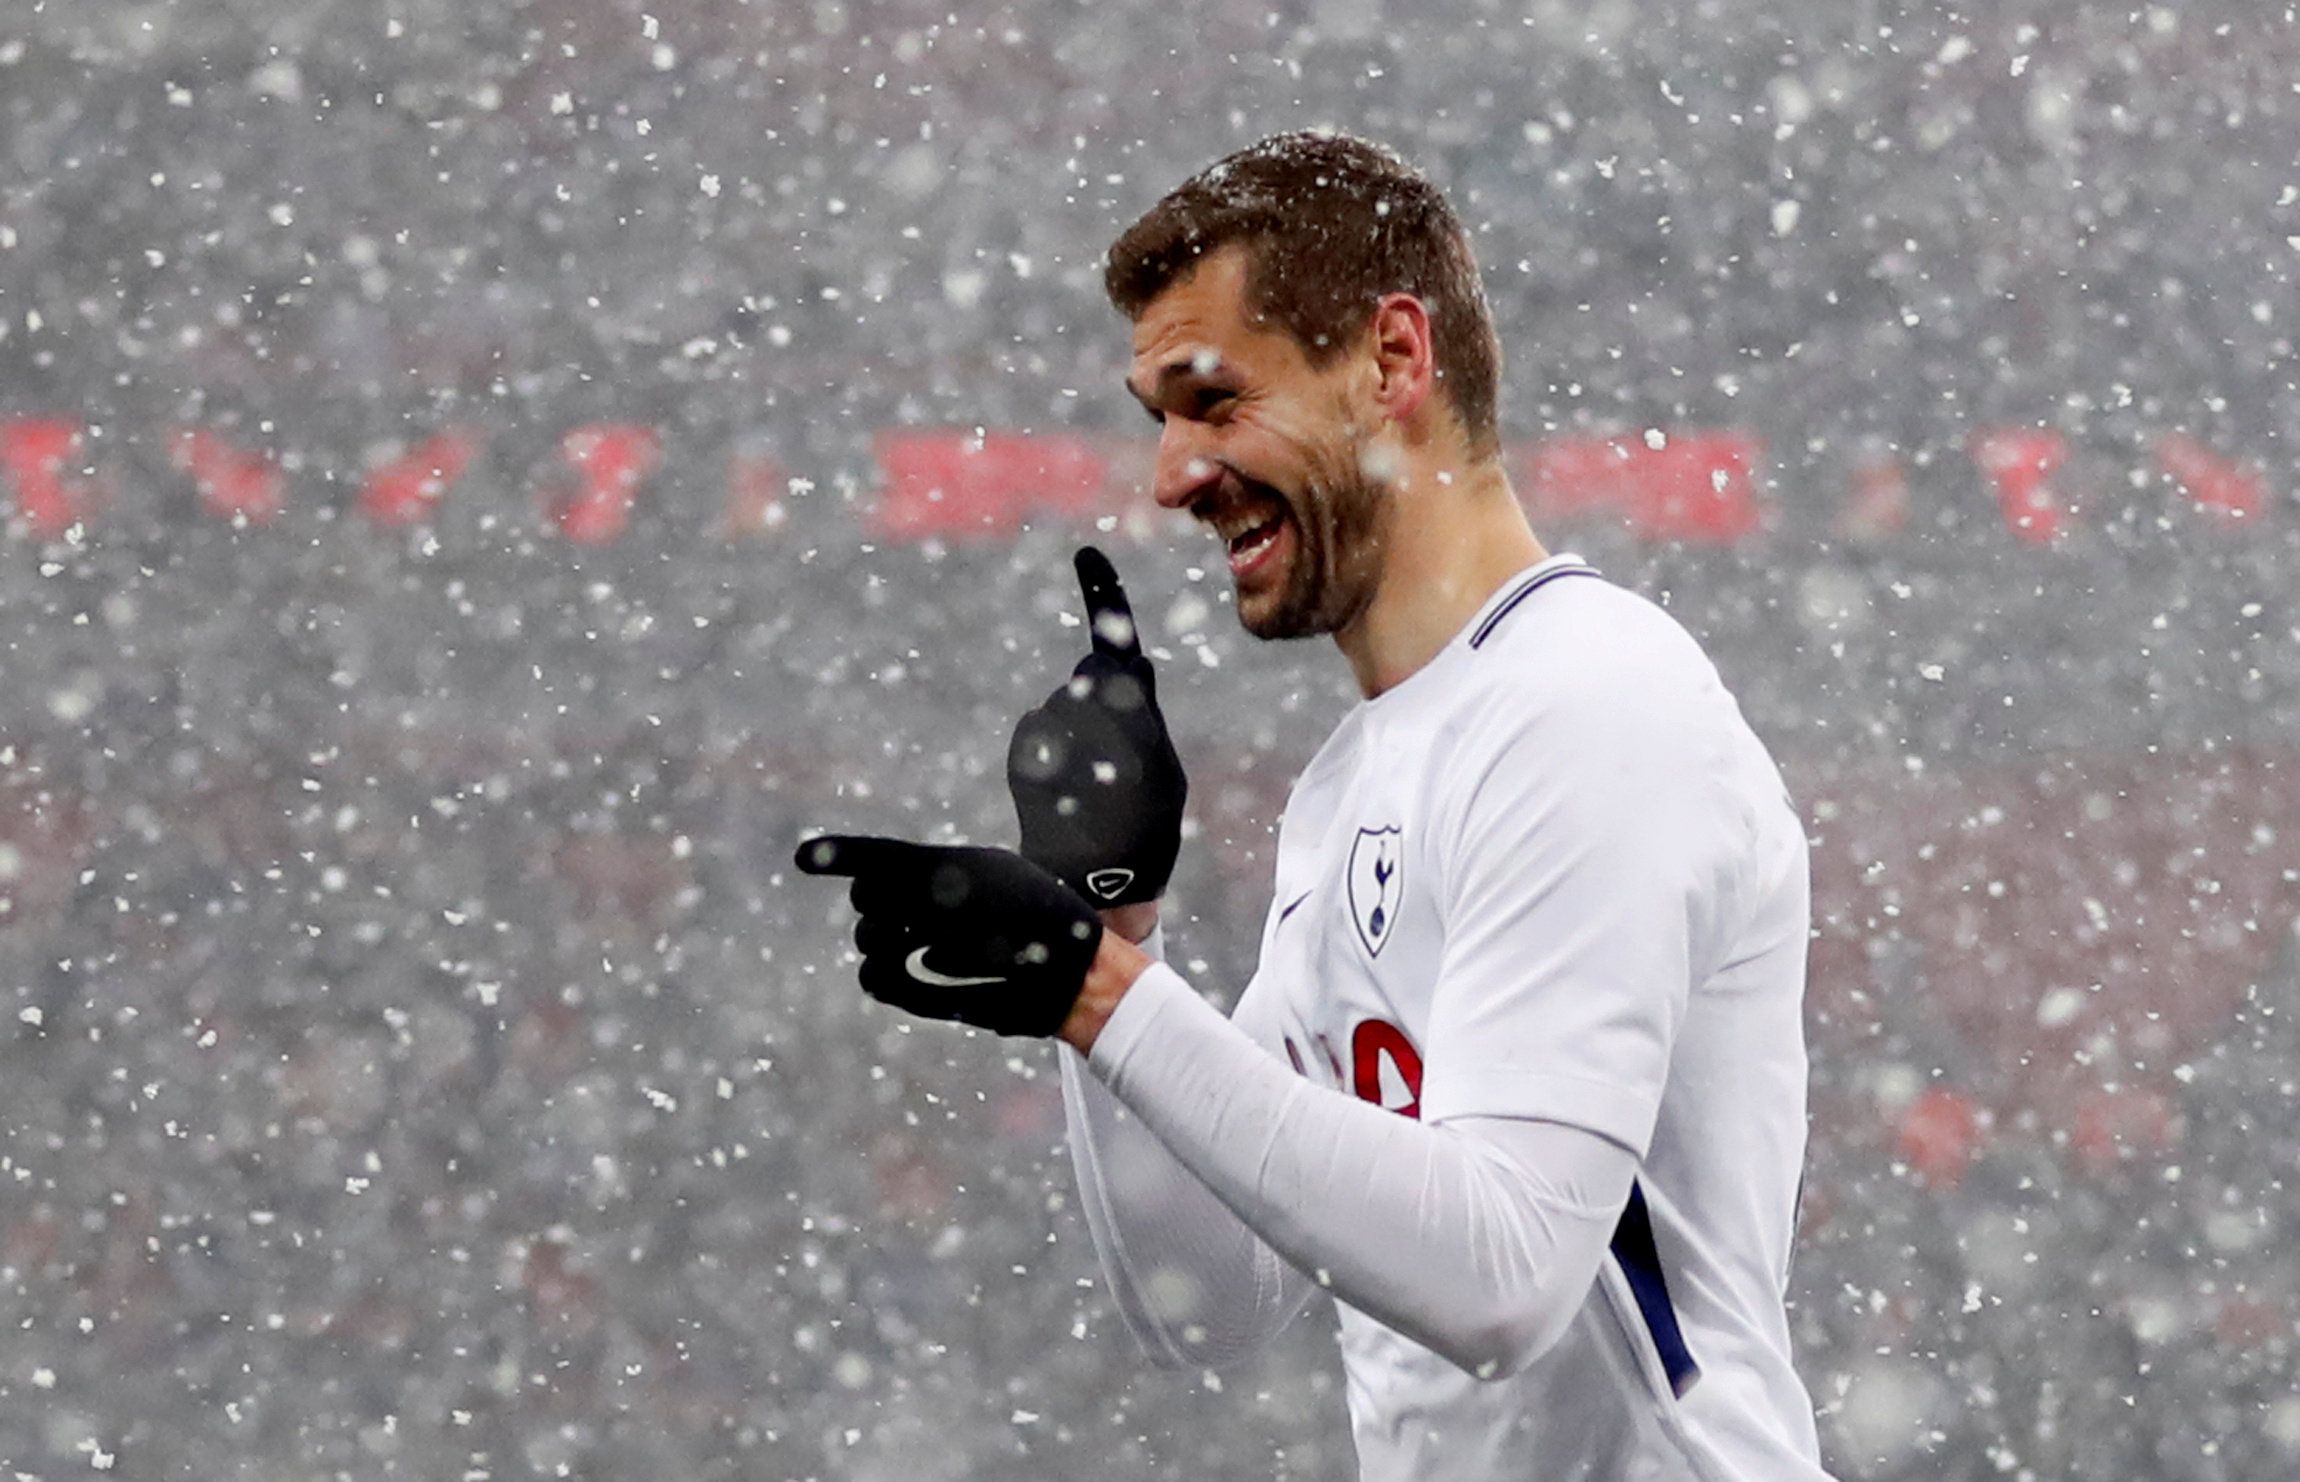 Soccer Football - FA Cup Fifth Round Replay - Tottenham Hotspur vs Rochdale - Wembley Stadium, London, Britain - February 28, 2018   Tottenham’s Fernando Llorente celebrates after scoring their fourth goal to complete his hat-trick    Action Images via Reuters/Matthew Childs     TPX IMAGES OF THE DAY